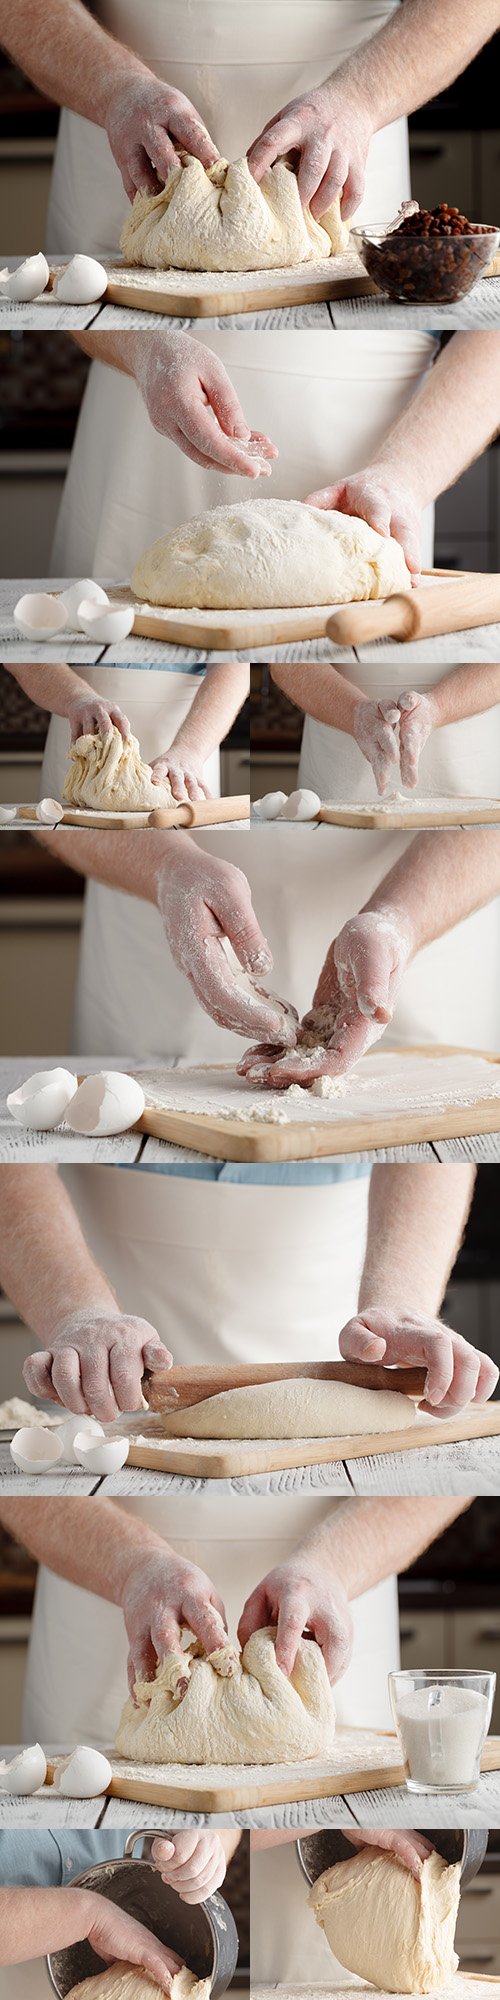 Bakery chef kneads baking dough with his hands